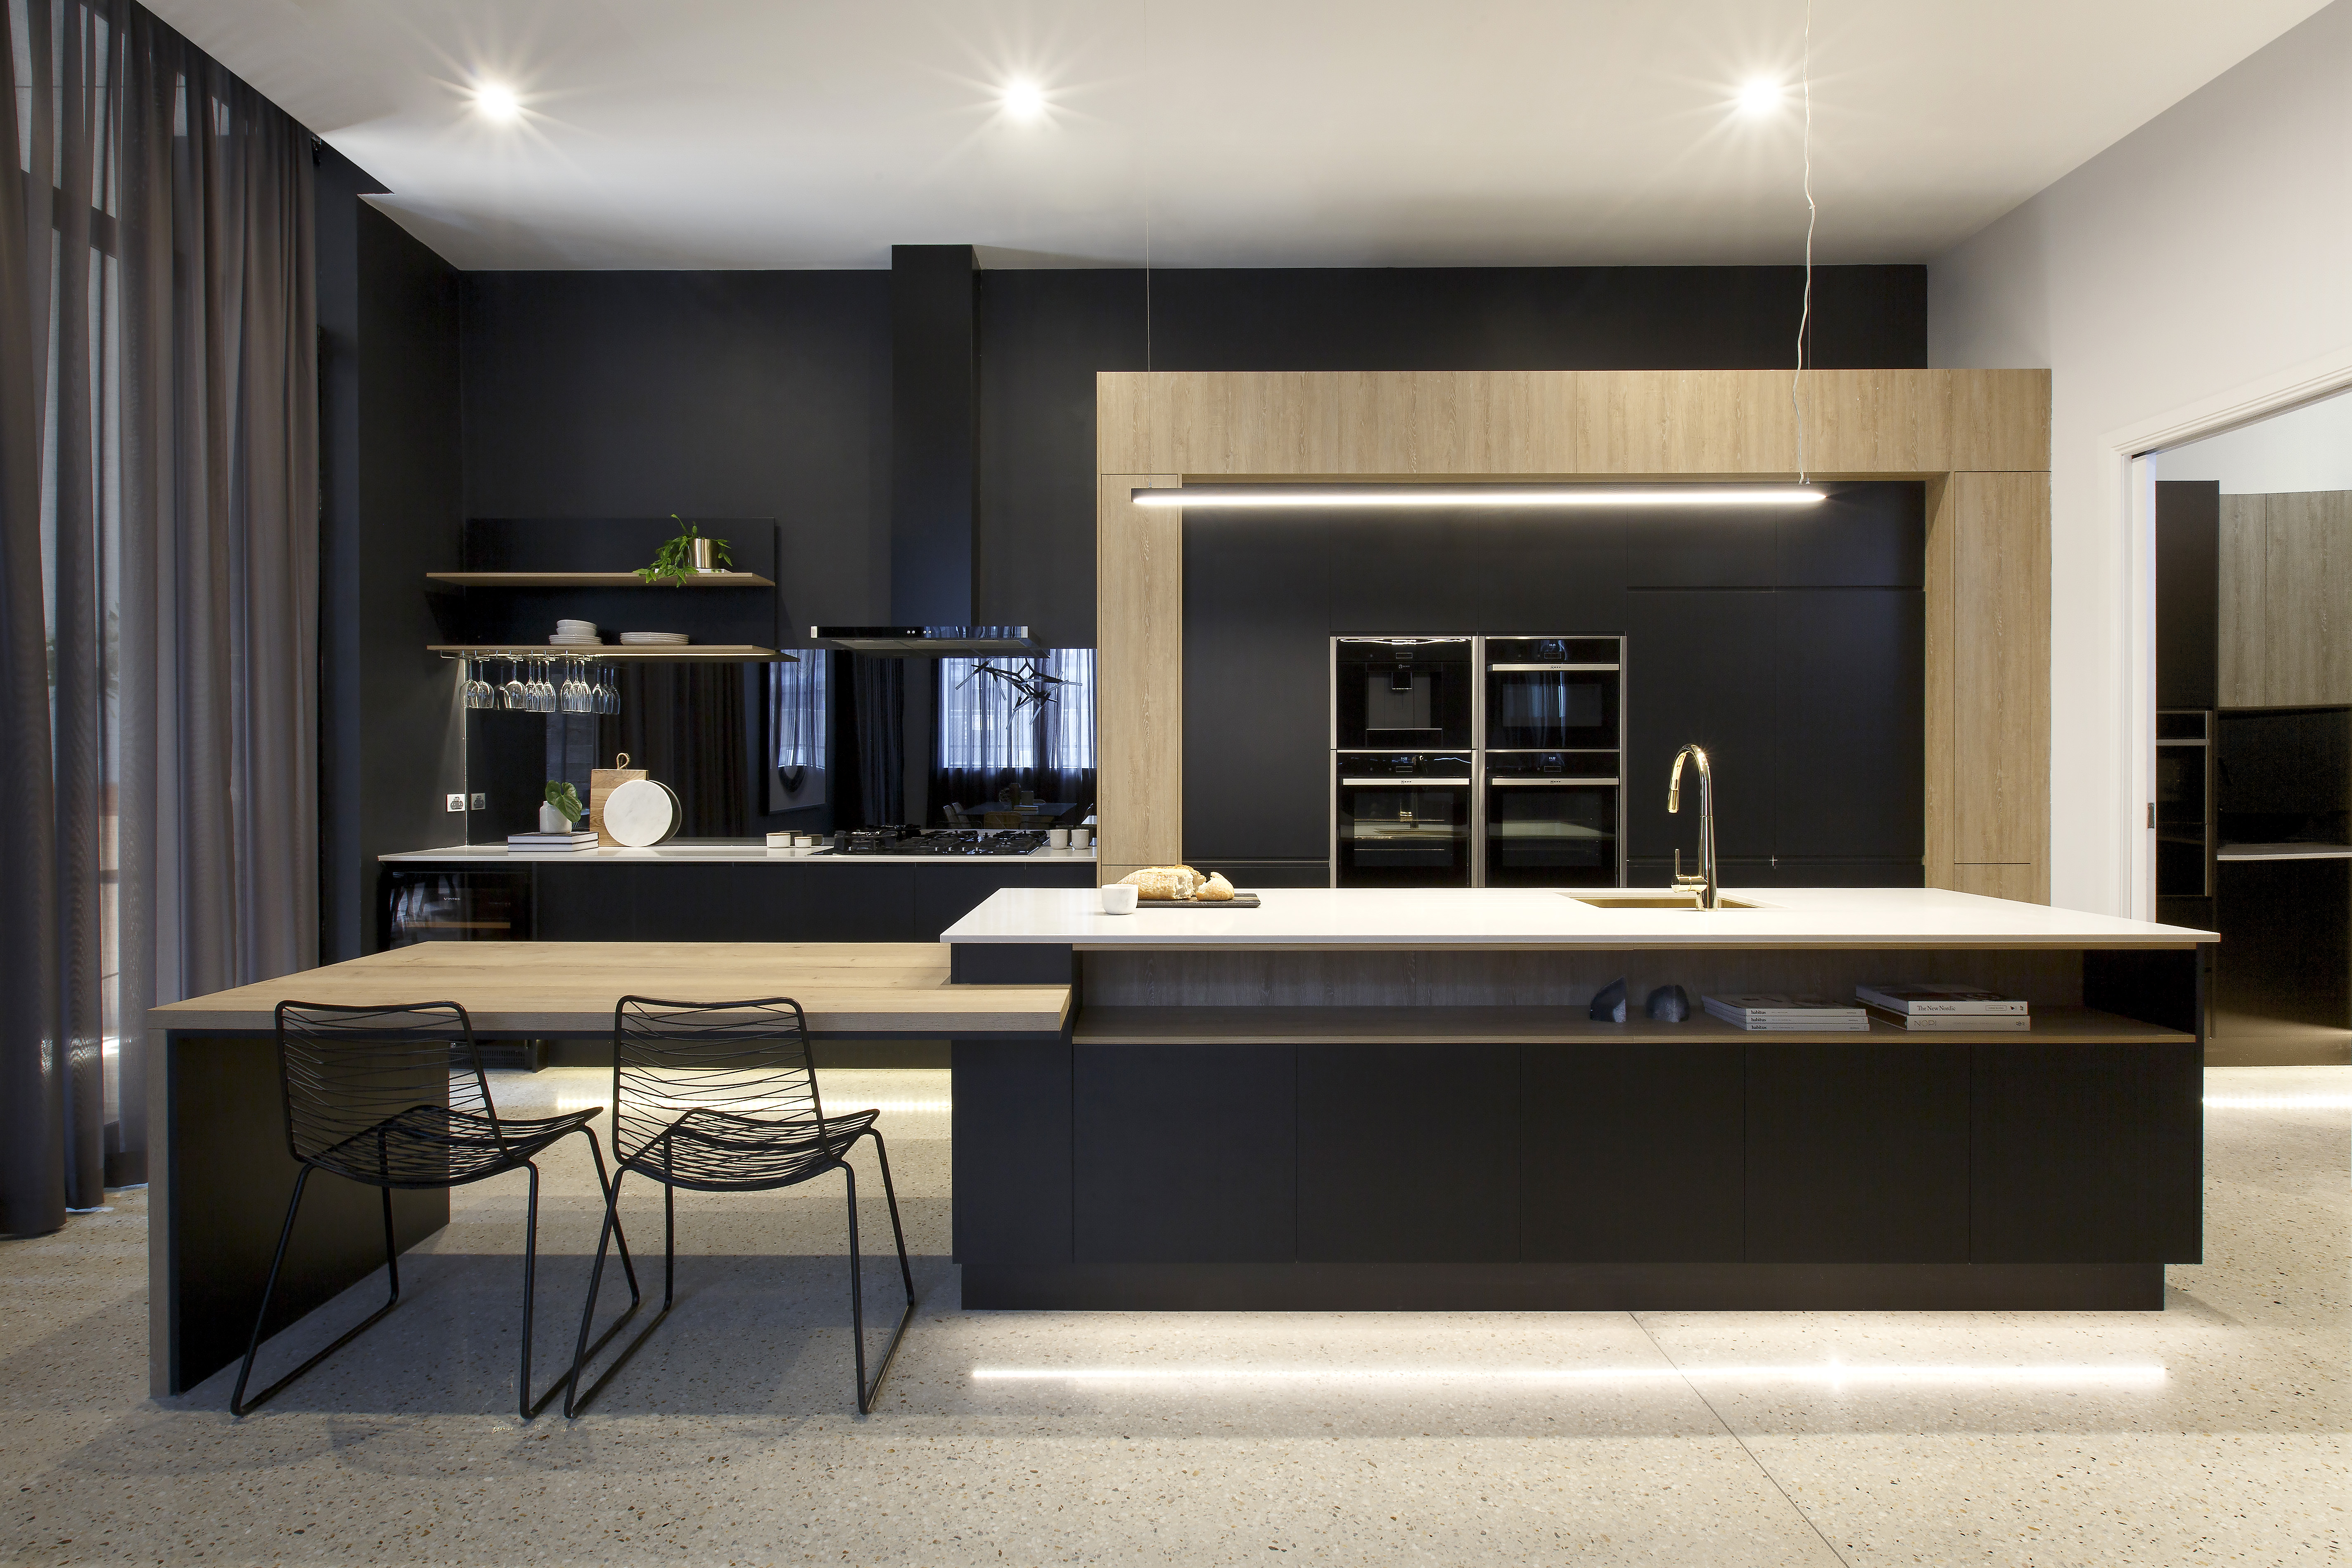 Dark and moody Entertainer Kitchen with Stylish and Spacious Island Bench